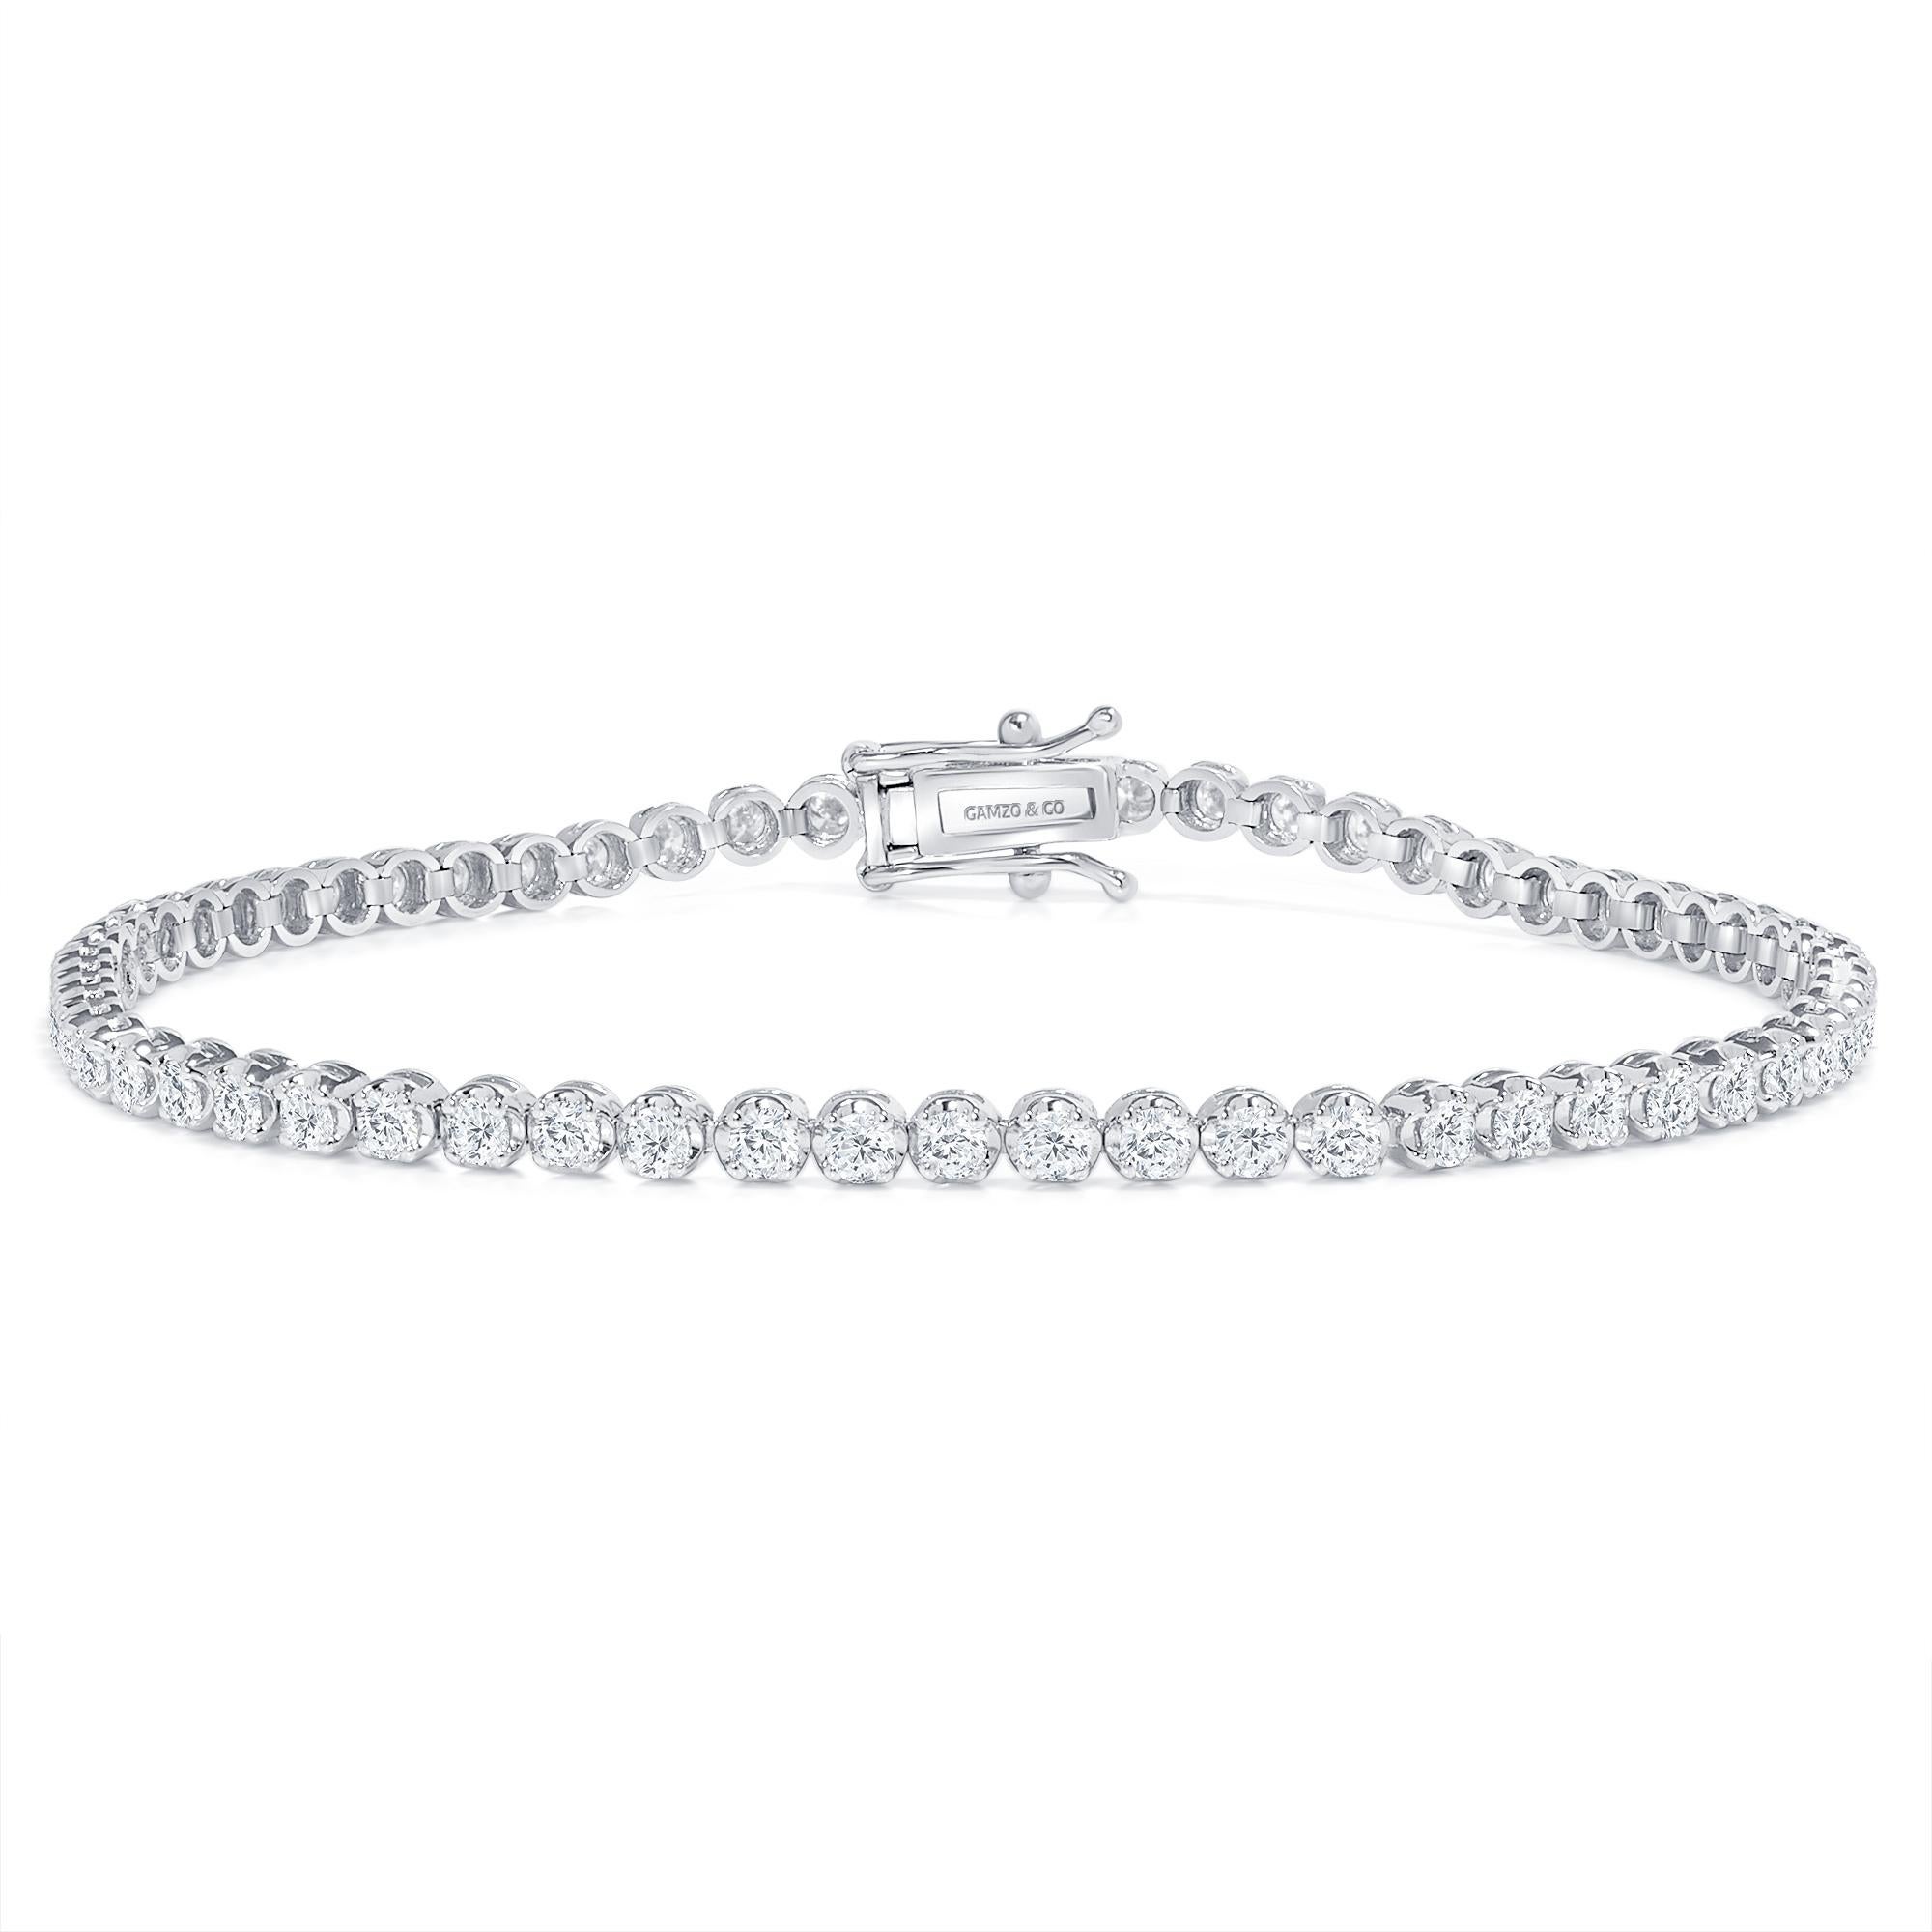 These beautiful round diamonds dance around your wrist as they absorb light and attention.
Metal: 14k Gold
Diamond Cut: Round
Diamond Total Carats: 3ct
Diamond Clarity: VS
Diamond Color: F
Color: White Gold
Bracelet Length: 7 Inches 
Included with